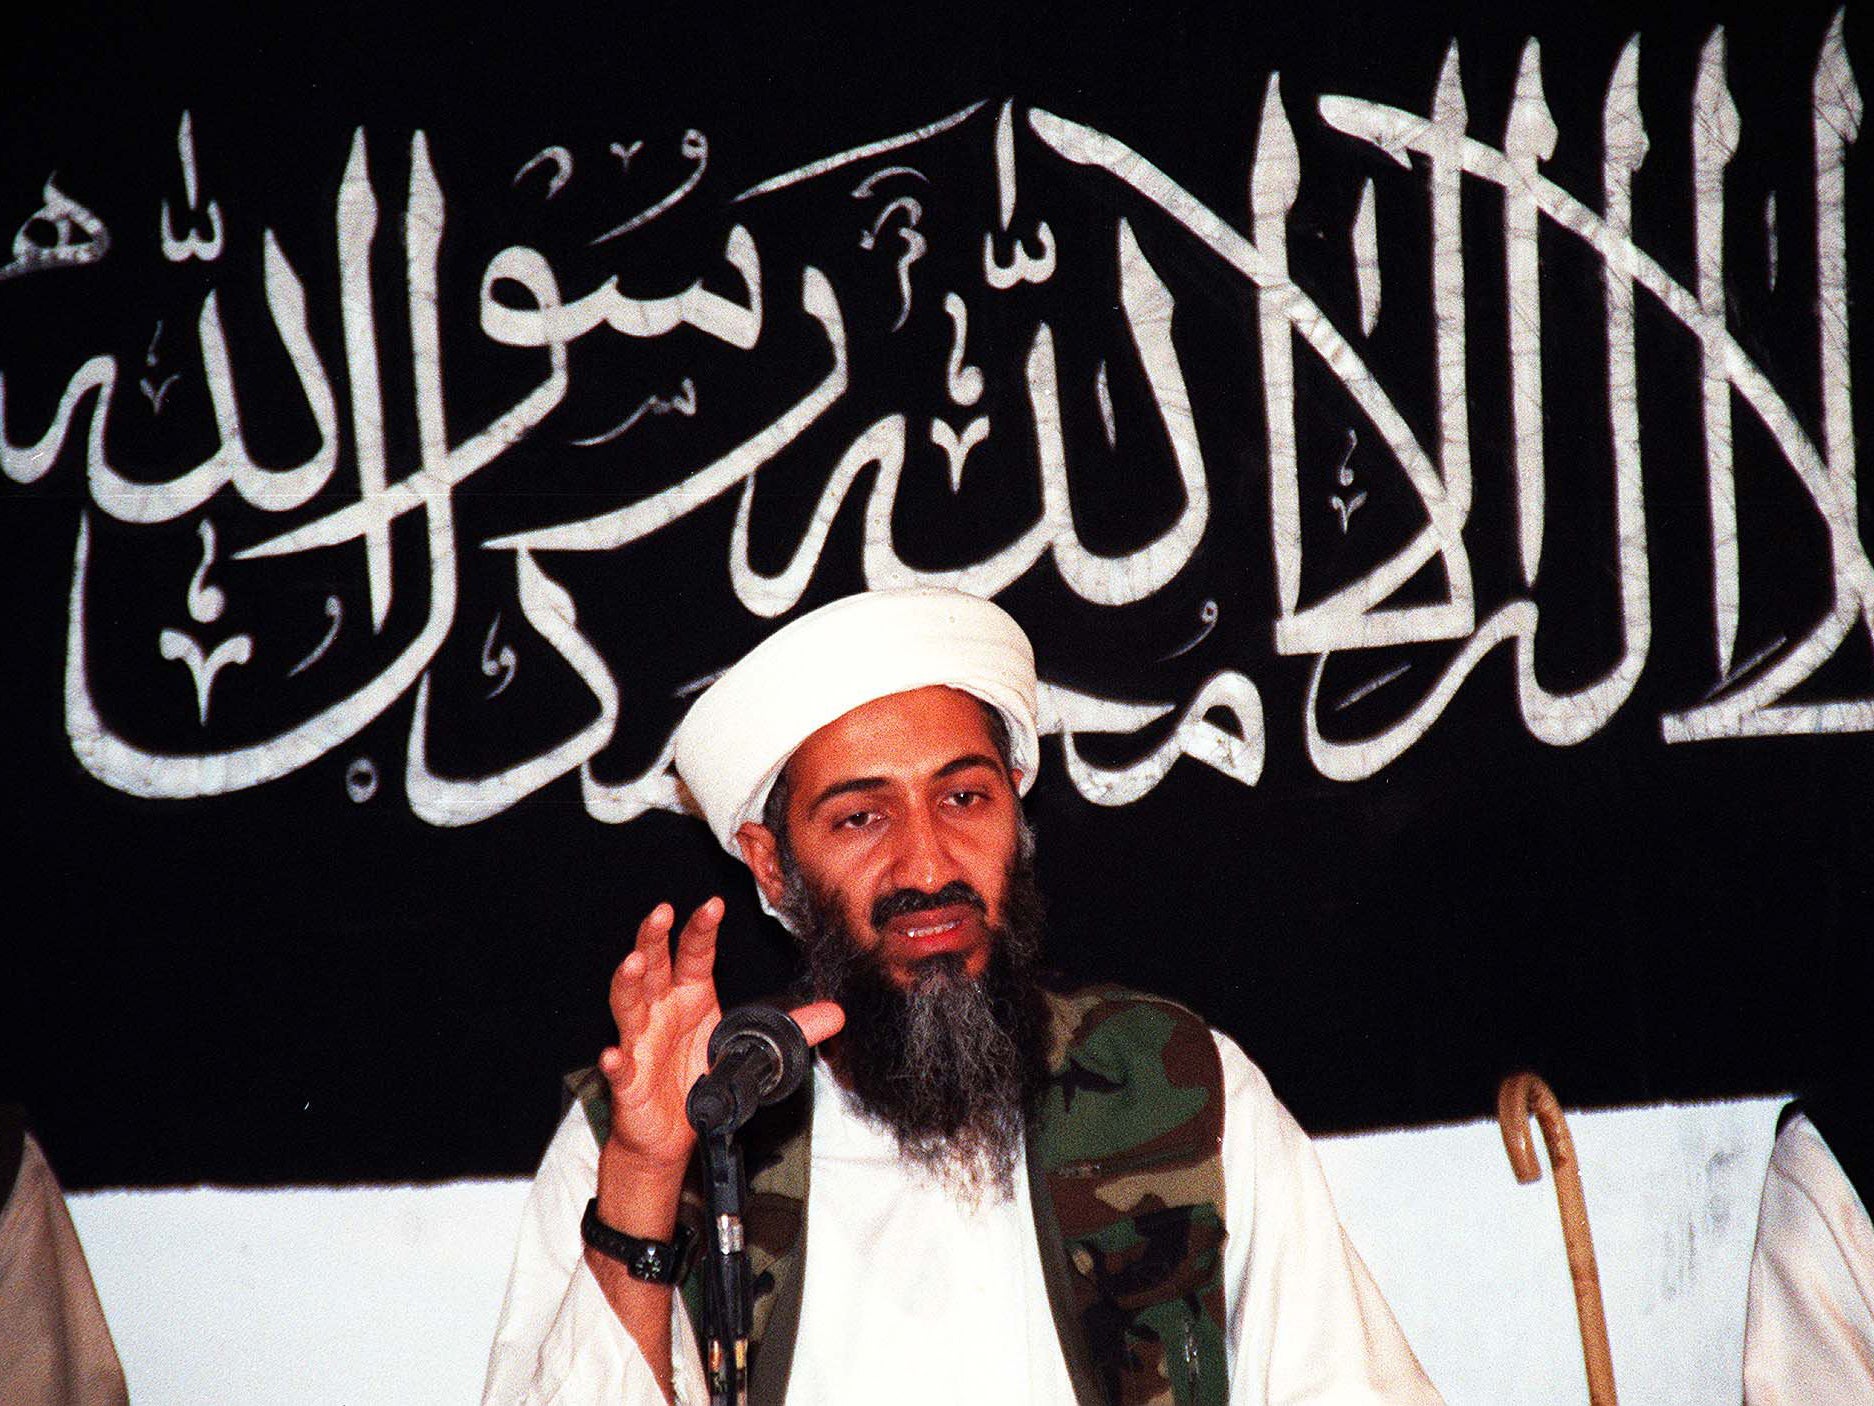 ‘I don’t necessarily buy the story that Bin Laden was responsible for 9/11,’ says Hersh